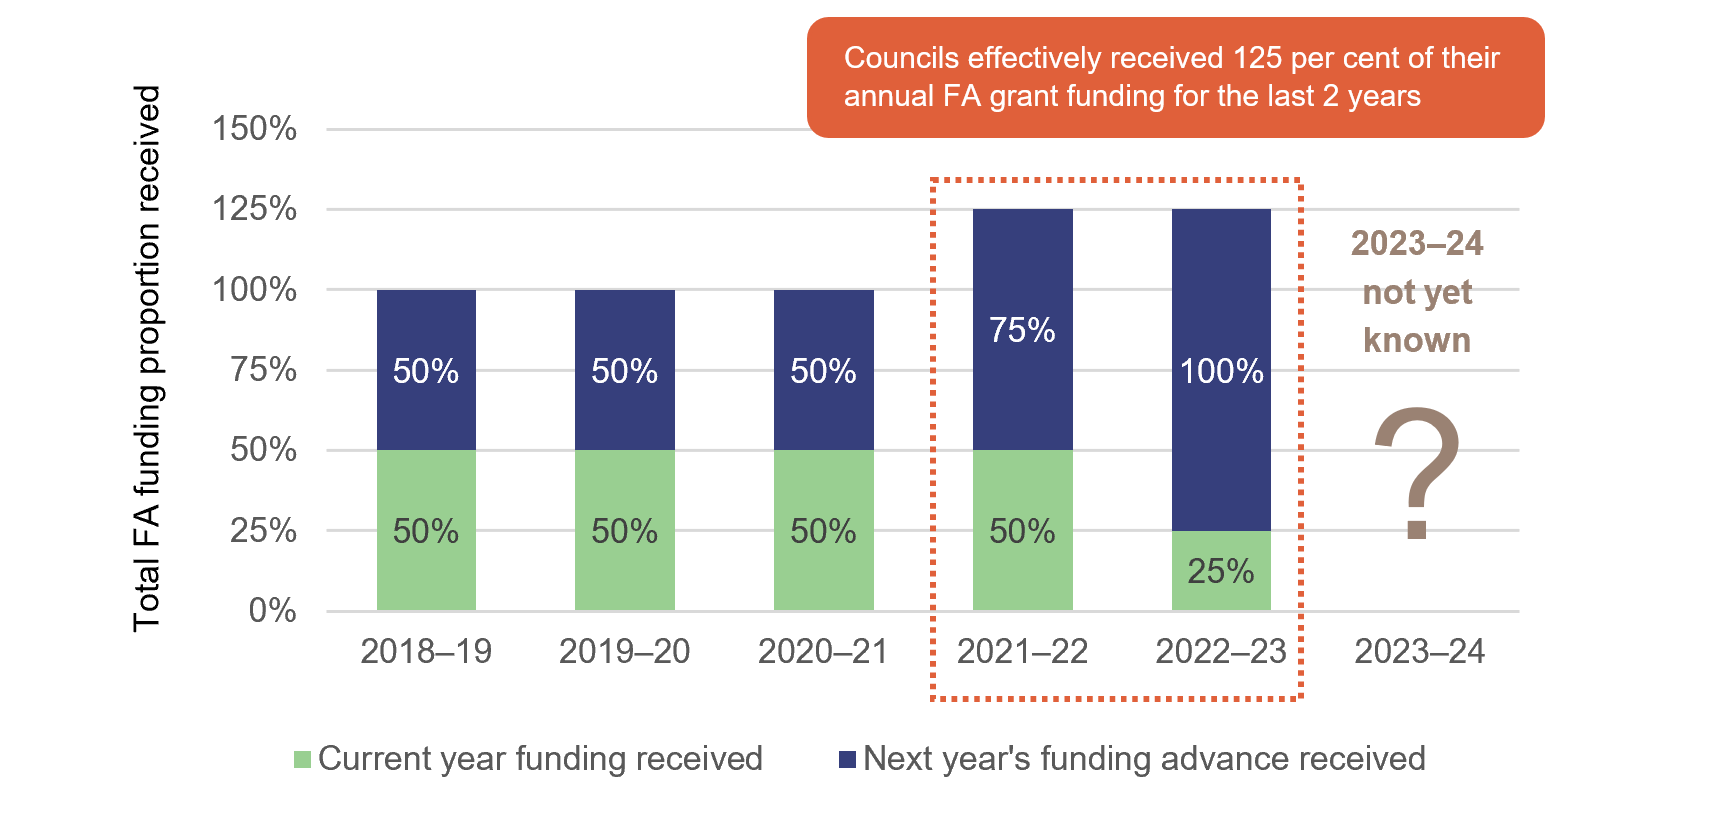 Proportion of advance funding received by councils each year